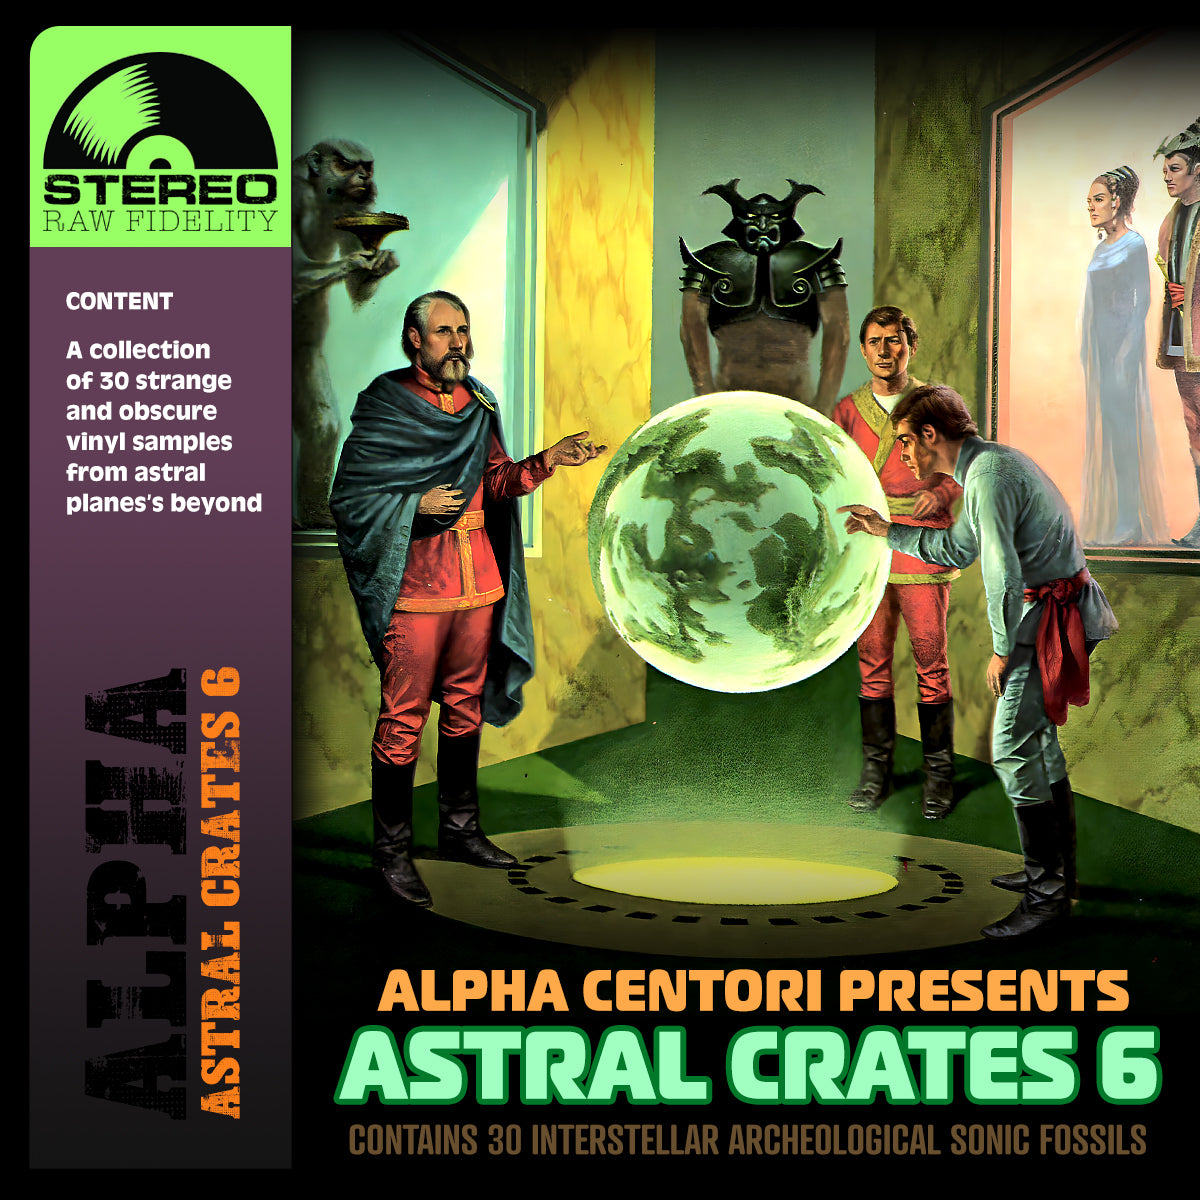 Astral Crates 6